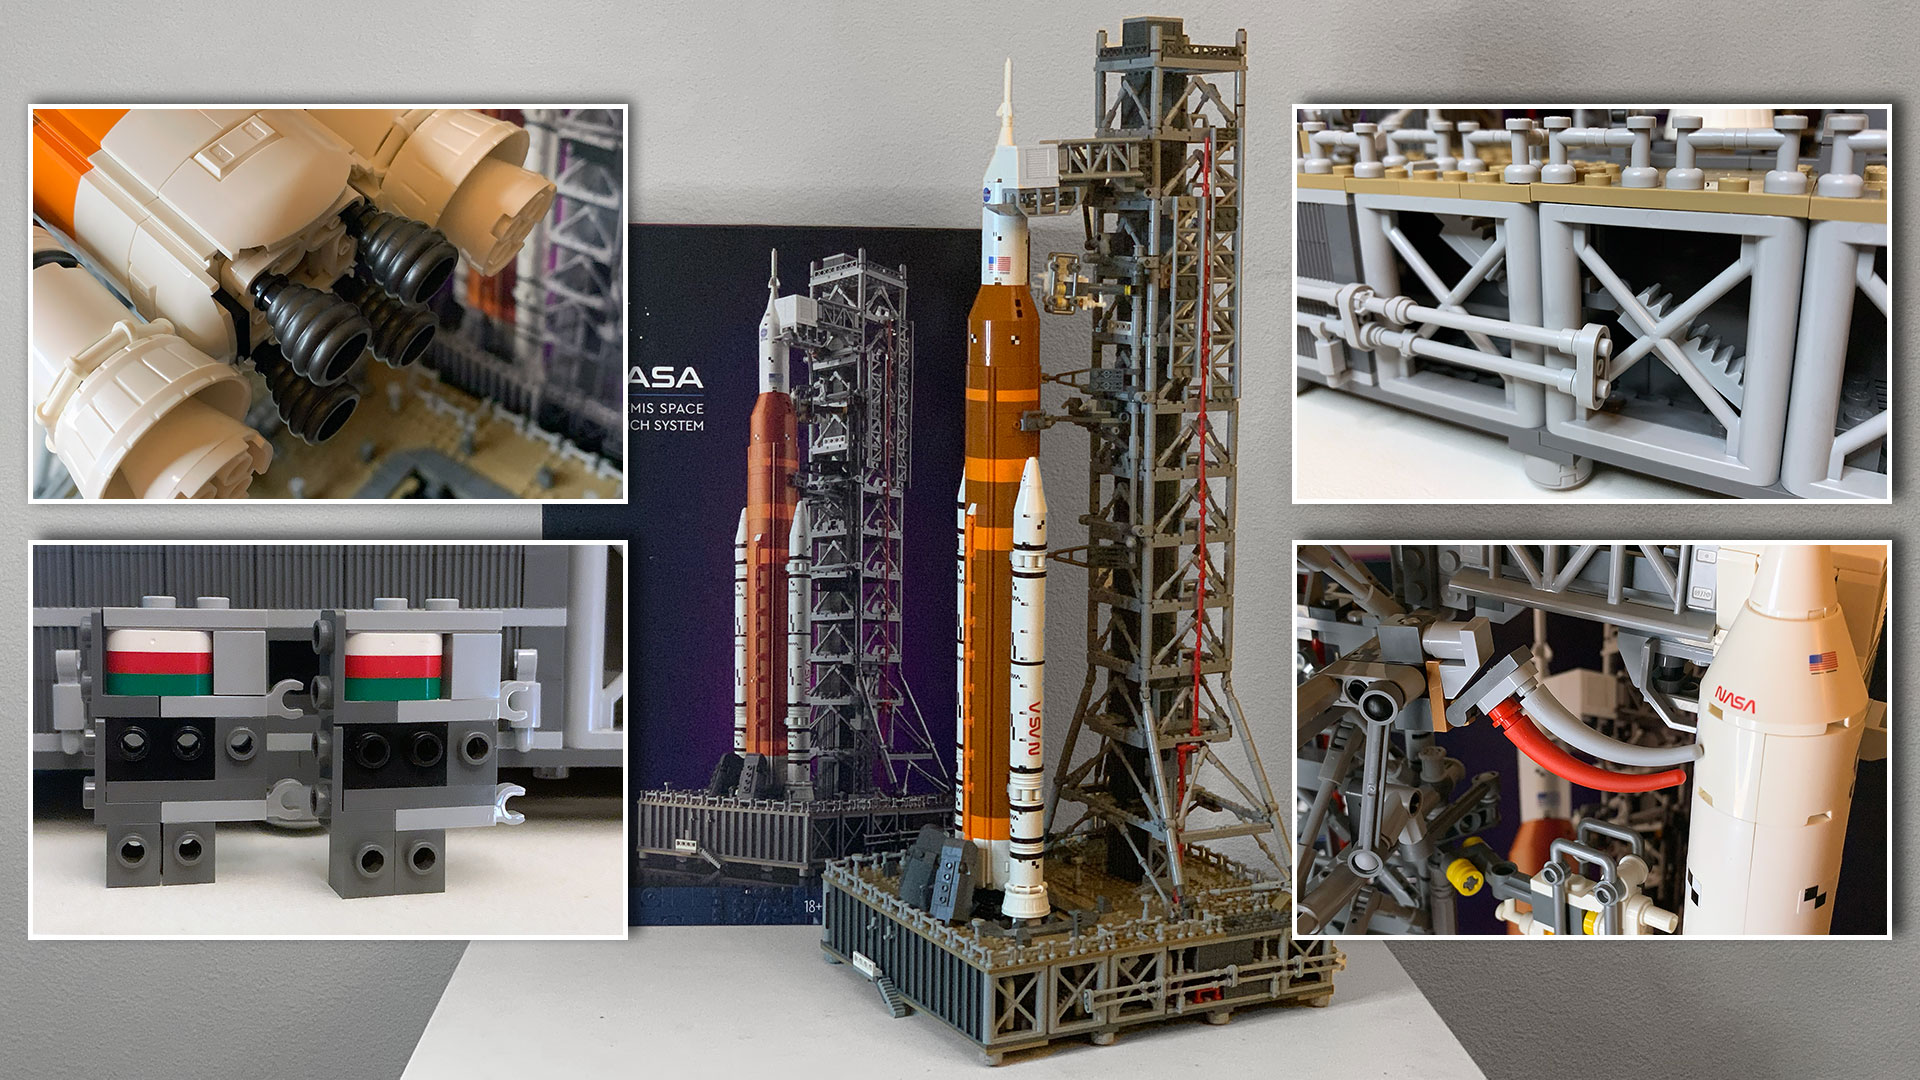 From tails to (umbilical) arms, the hidden details in Lego’s new Artemis SLS rocket Space